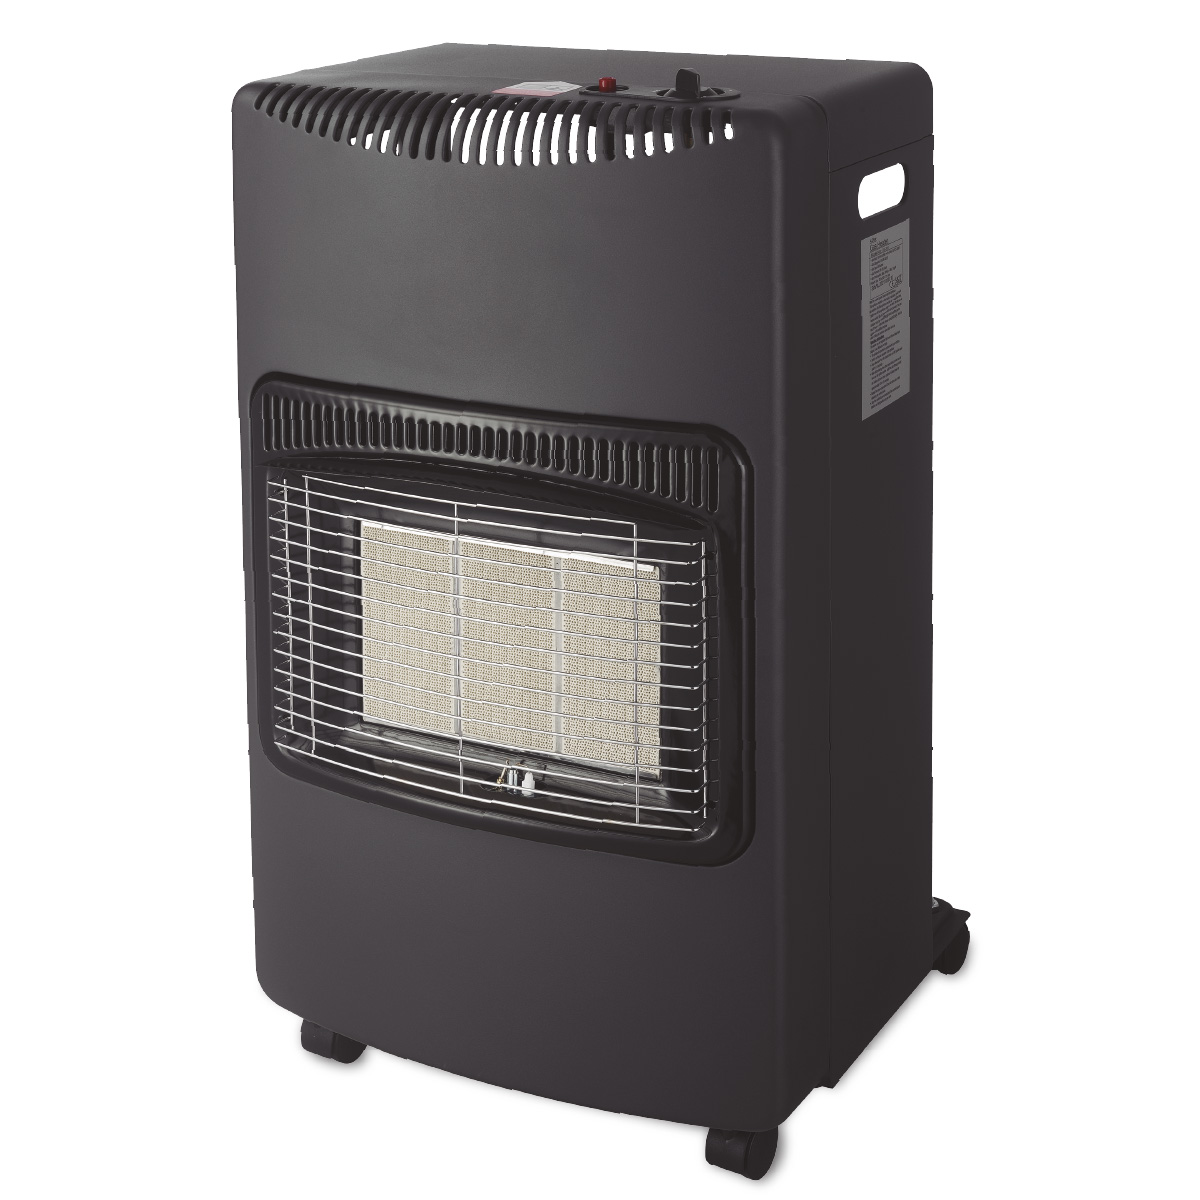 Foldable gas heater Max. 4200W